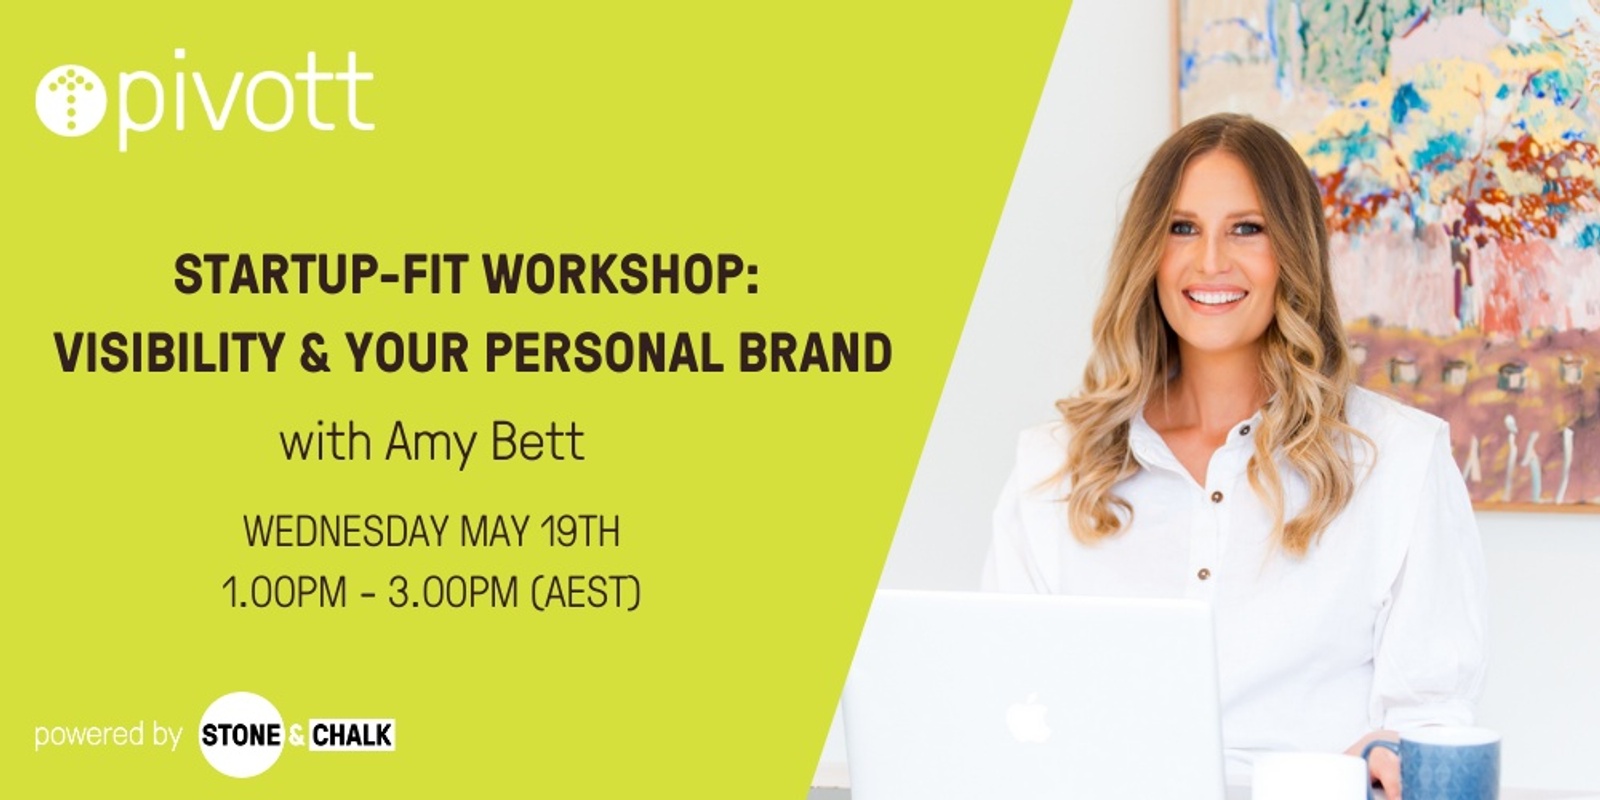 Banner image for Pivott Workshop - Visibility & Your Personal Brand